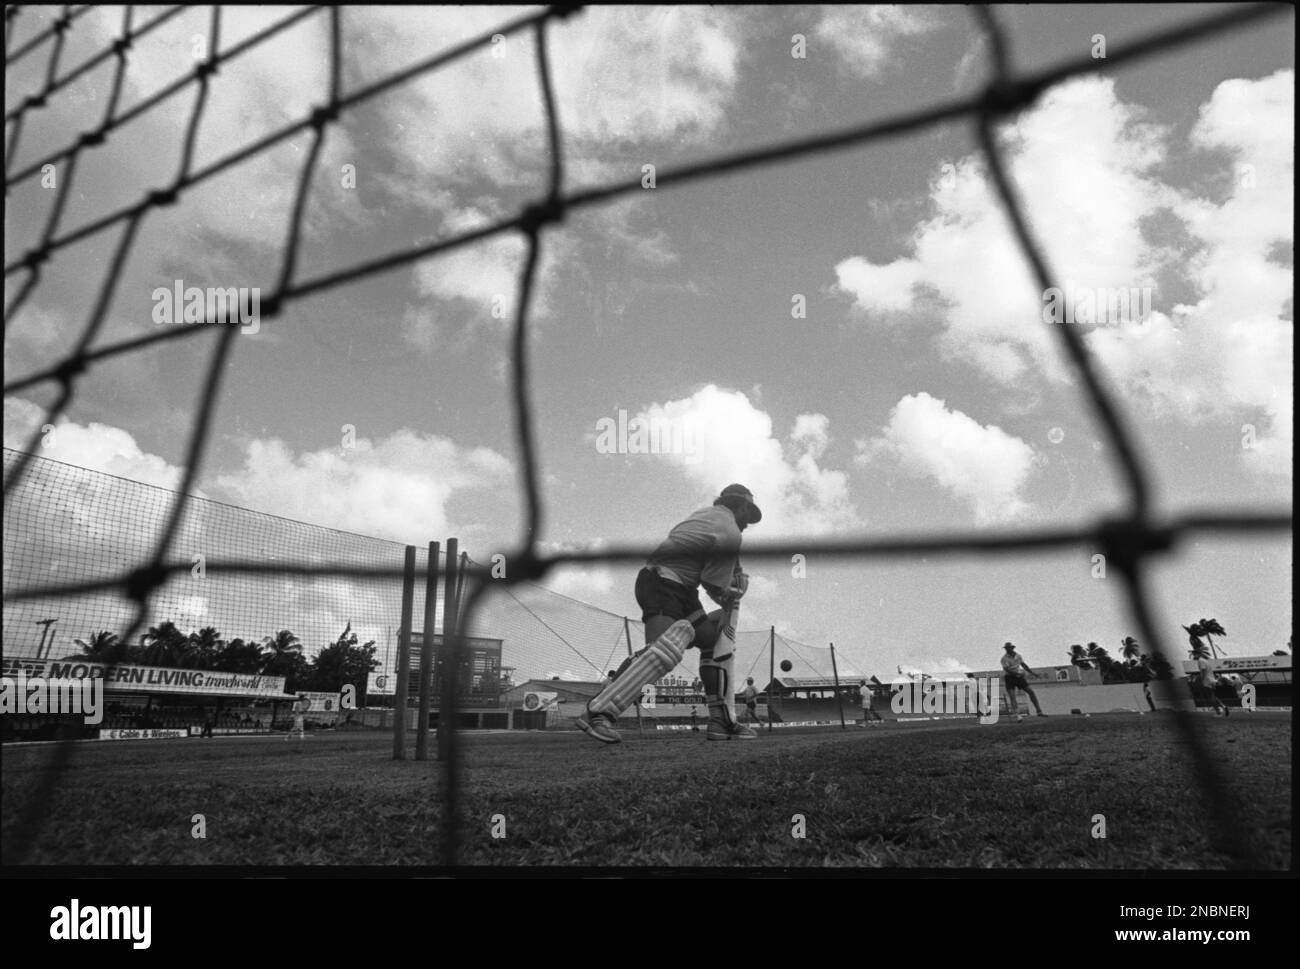 Cricket West Indies v Australia 1991  David Boon of Australia during net practice in Barbados  Photo by Tony Henshaw Stock Photo